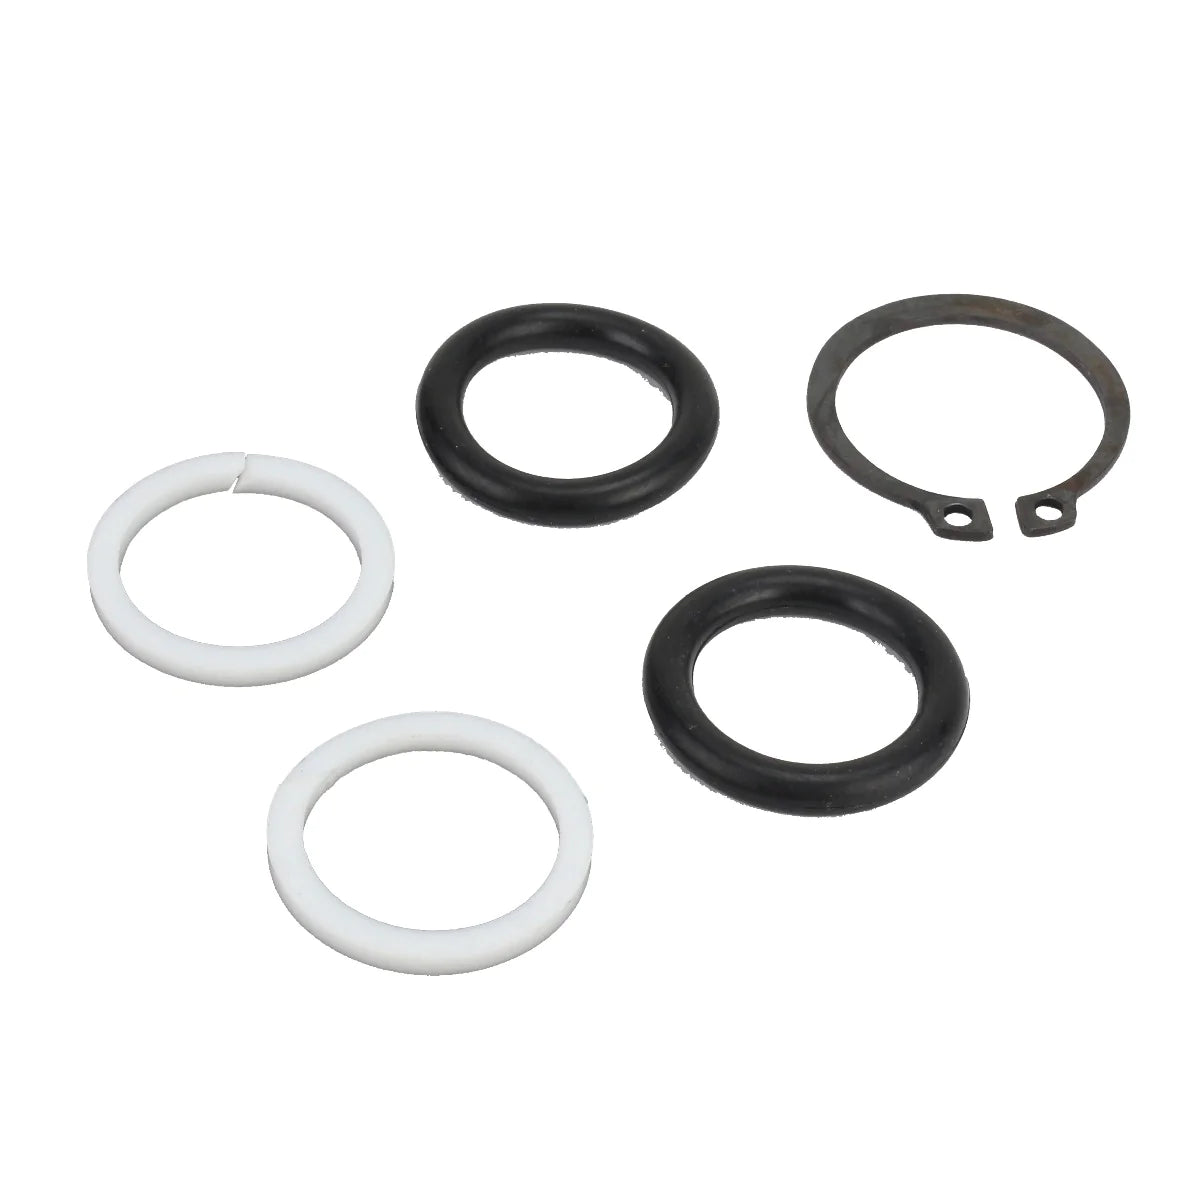 Milton P2760D-ORK Hose Reel Replacement Parts (INLET Spacers and O-Rings)